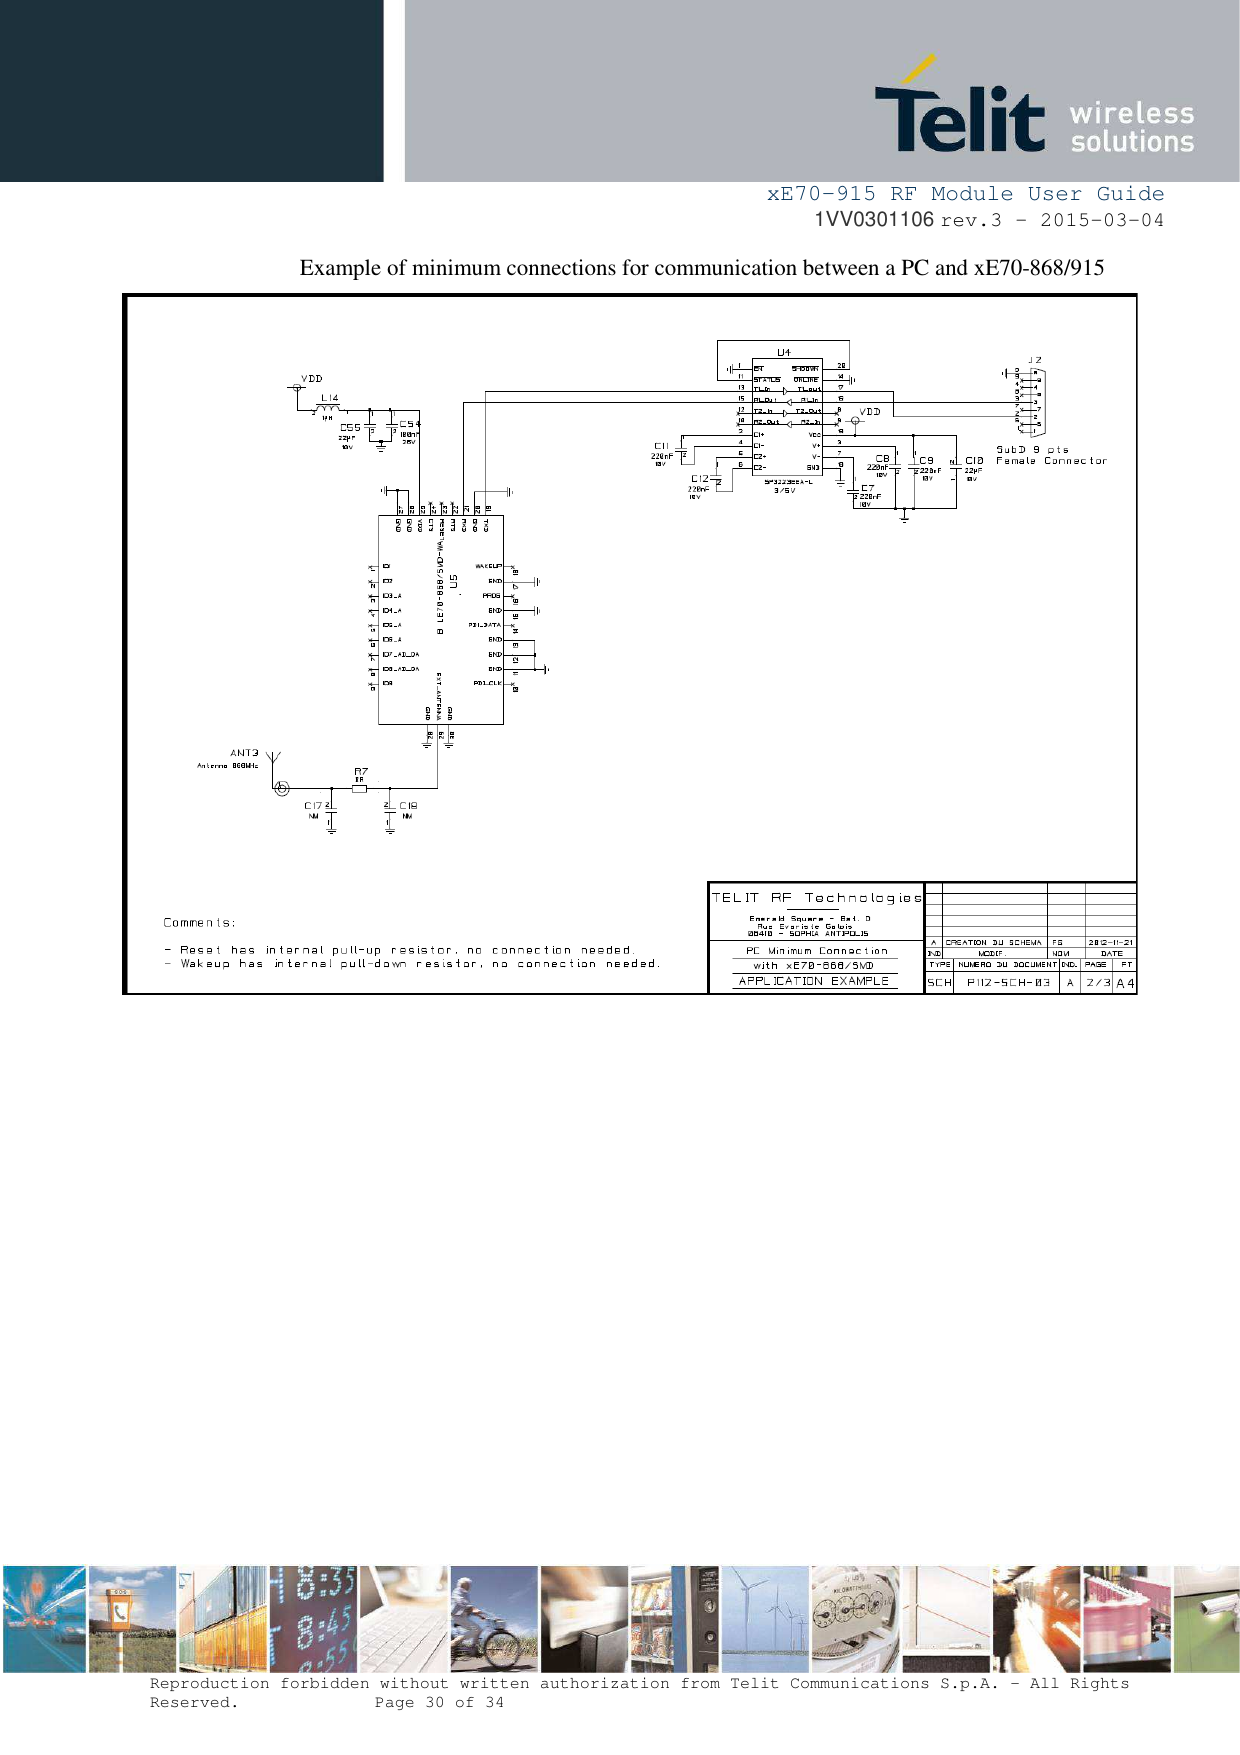     xE70-915 RF Module User Guide 1VV0301106 rev.3 – 2015-03-04  Reproduction forbidden without written authorization from Telit Communications S.p.A. - All Rights Reserved.    Page 30 of 34  Example of minimum connections for communication between a PC and xE70-868/915    